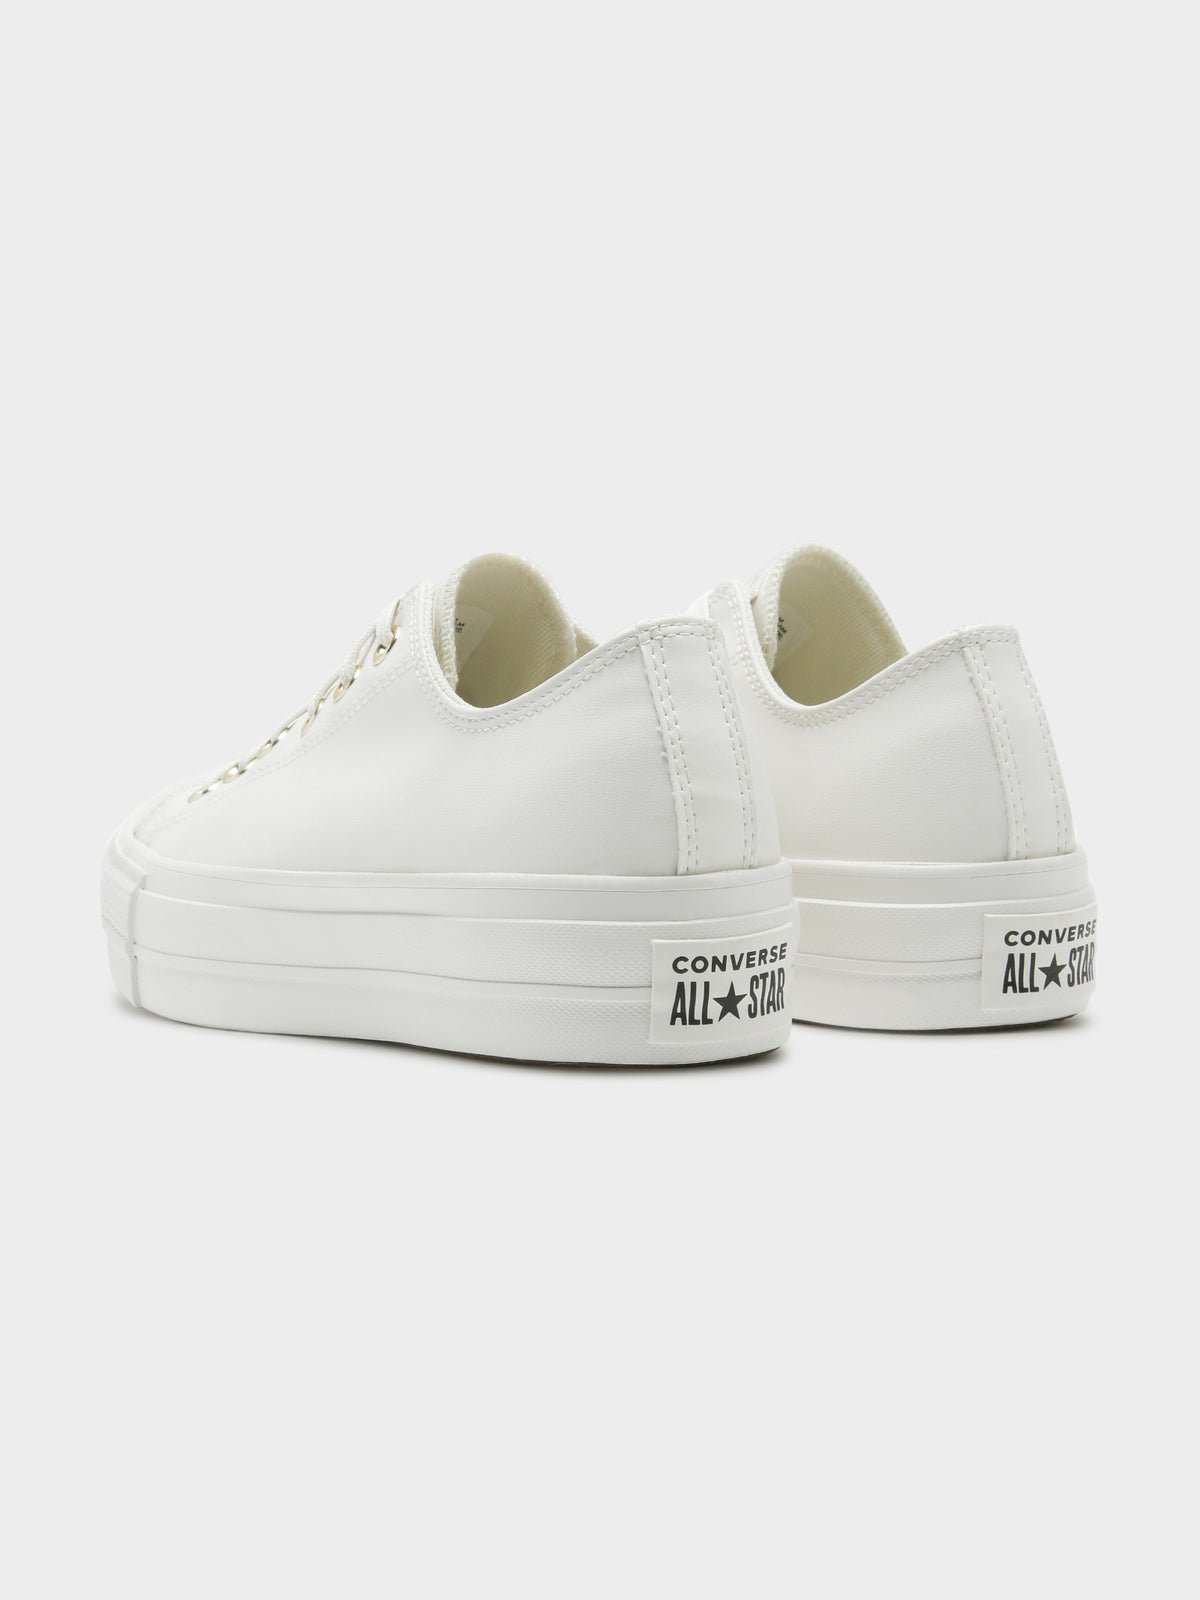 Womens Synthetic Leather Lift Low Top Sneakers in Vintage White